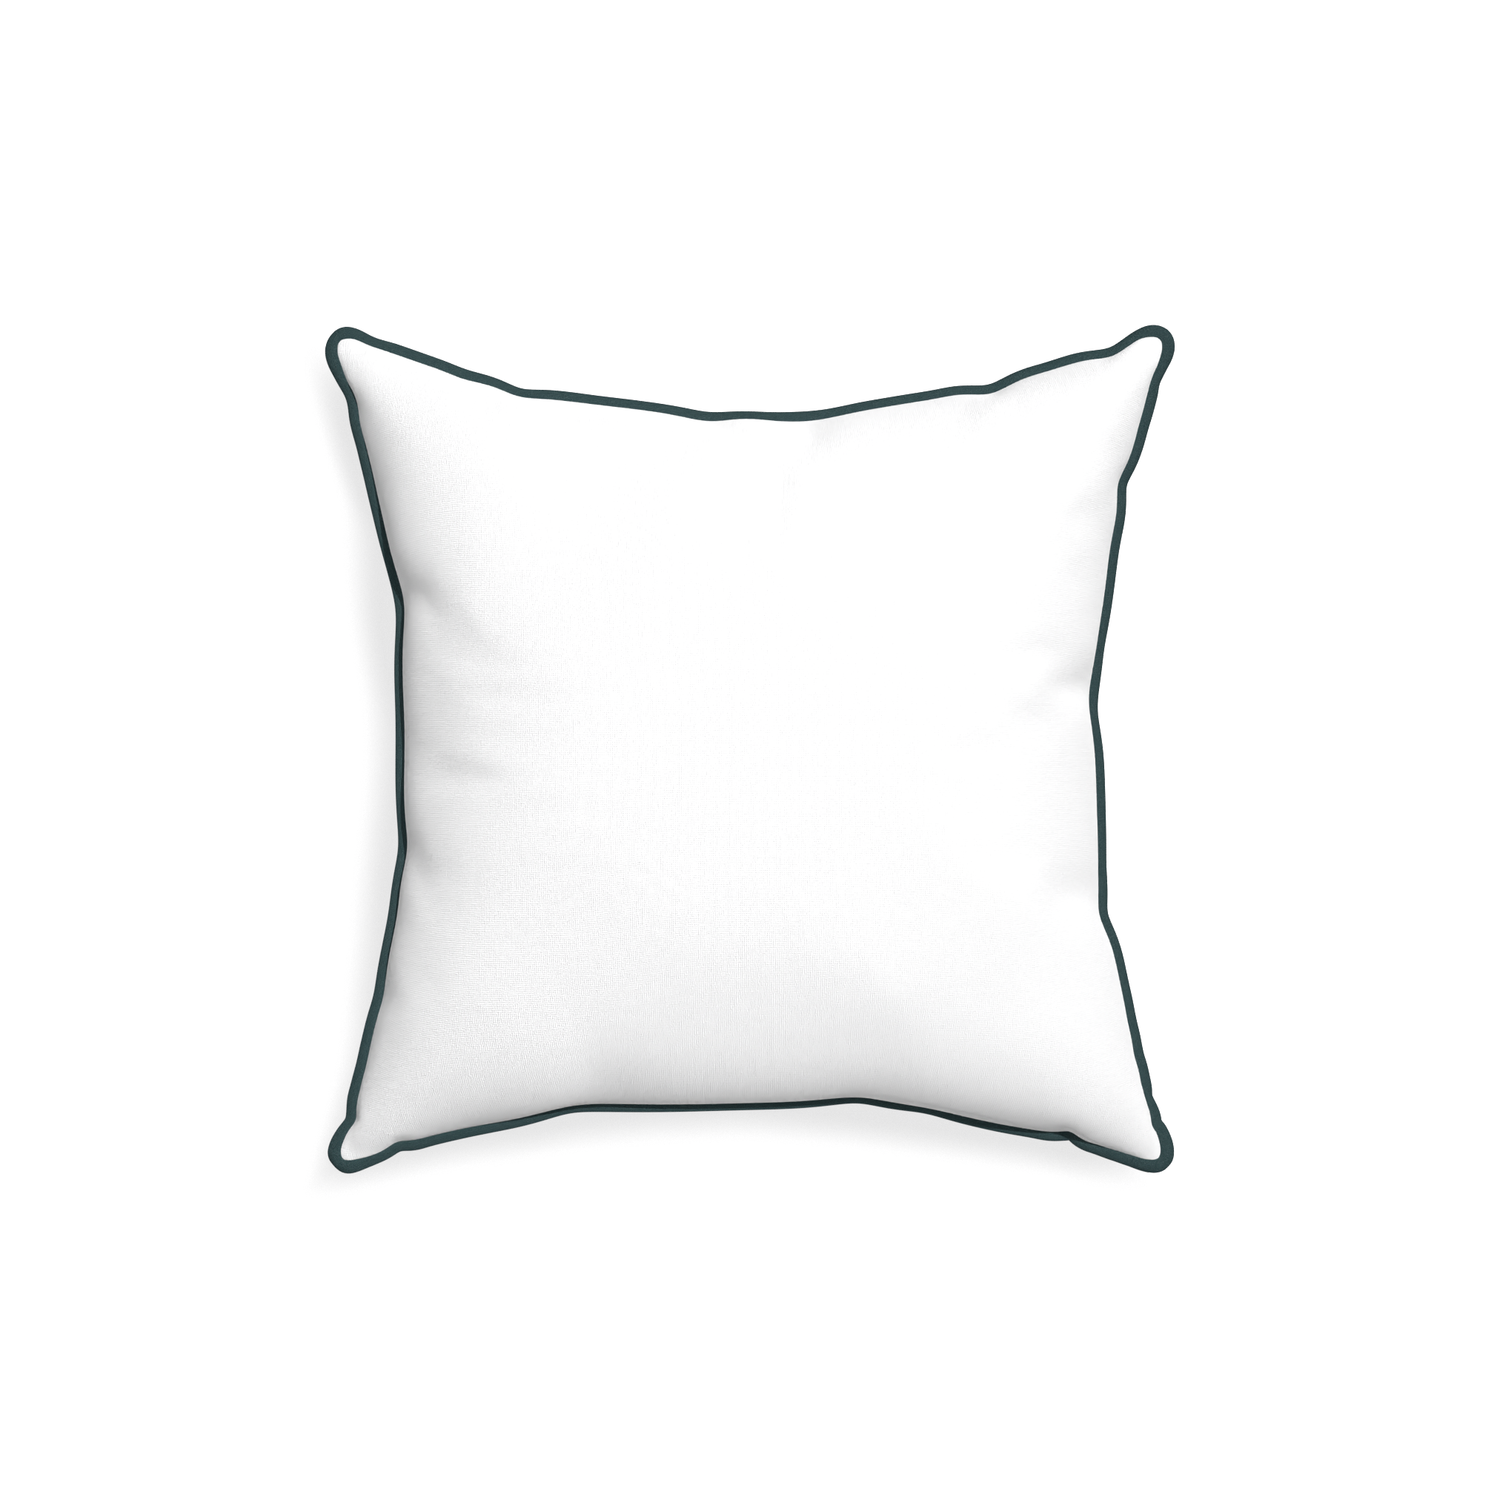 18-square snow custom white cottonpillow with p piping on white background